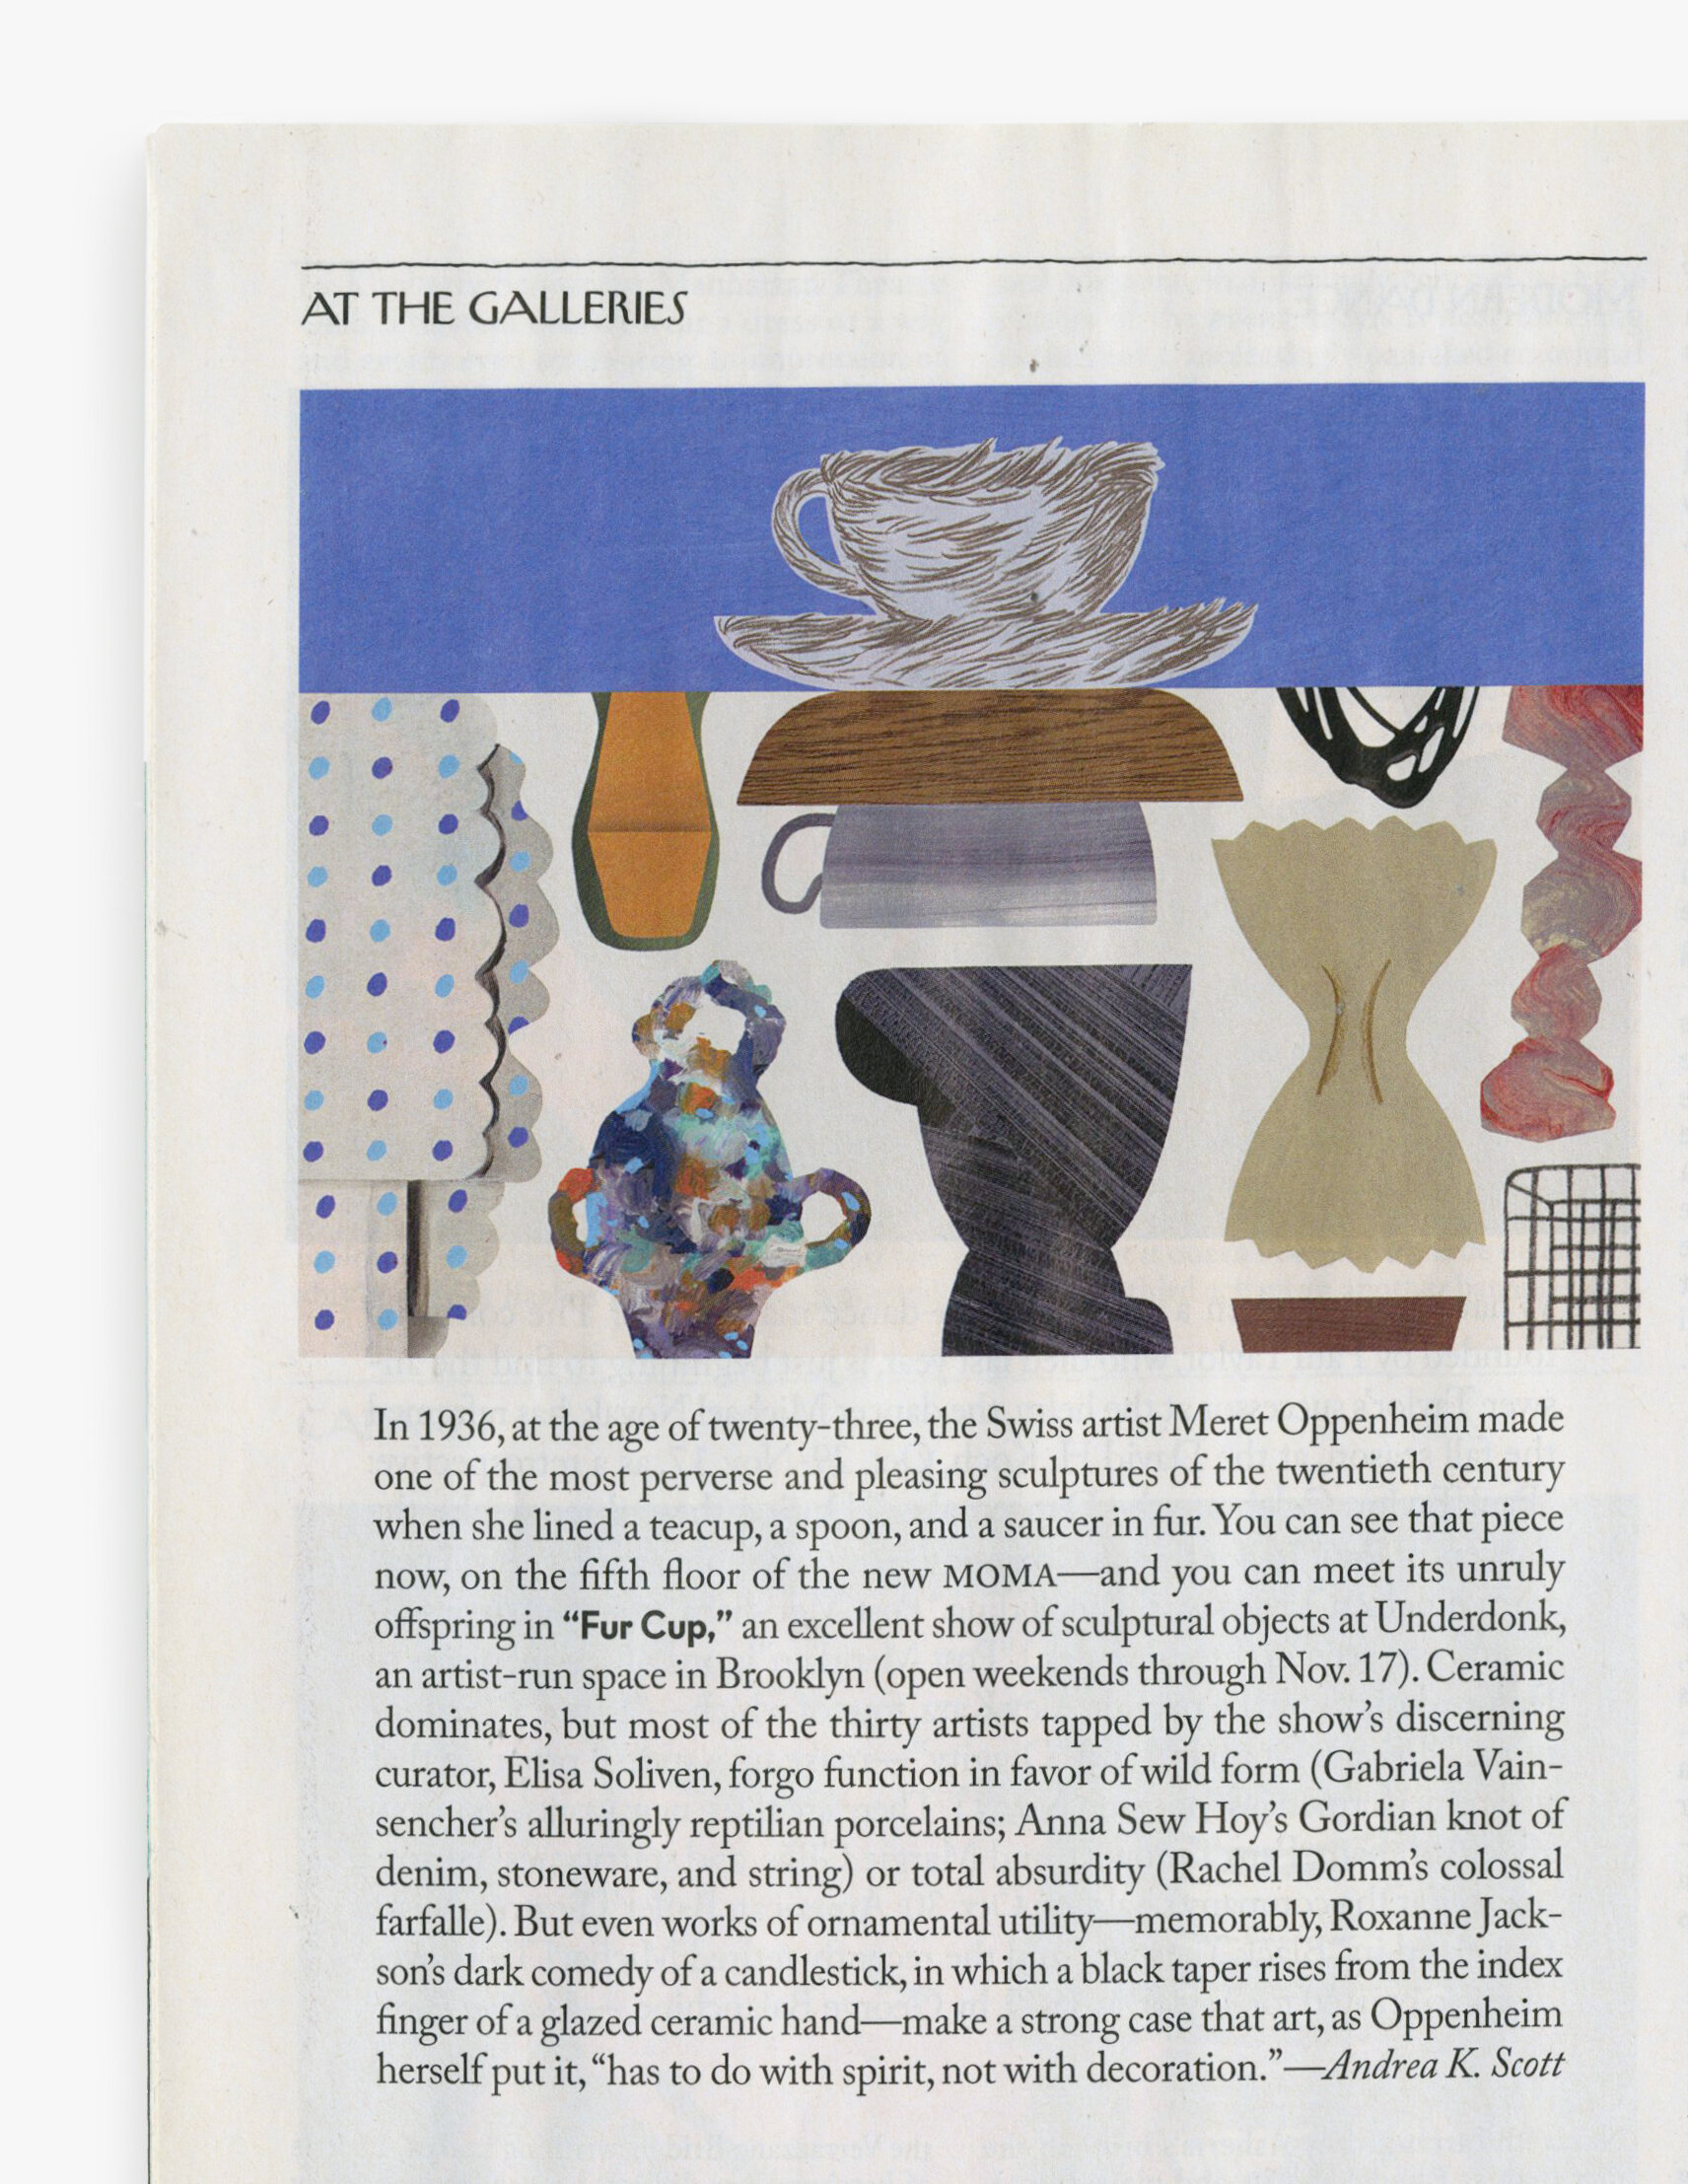  Review of  Fur Cup  by Andrea Scott in The New Yorker, November 2019 / Illustration by Aude Van Ryn   